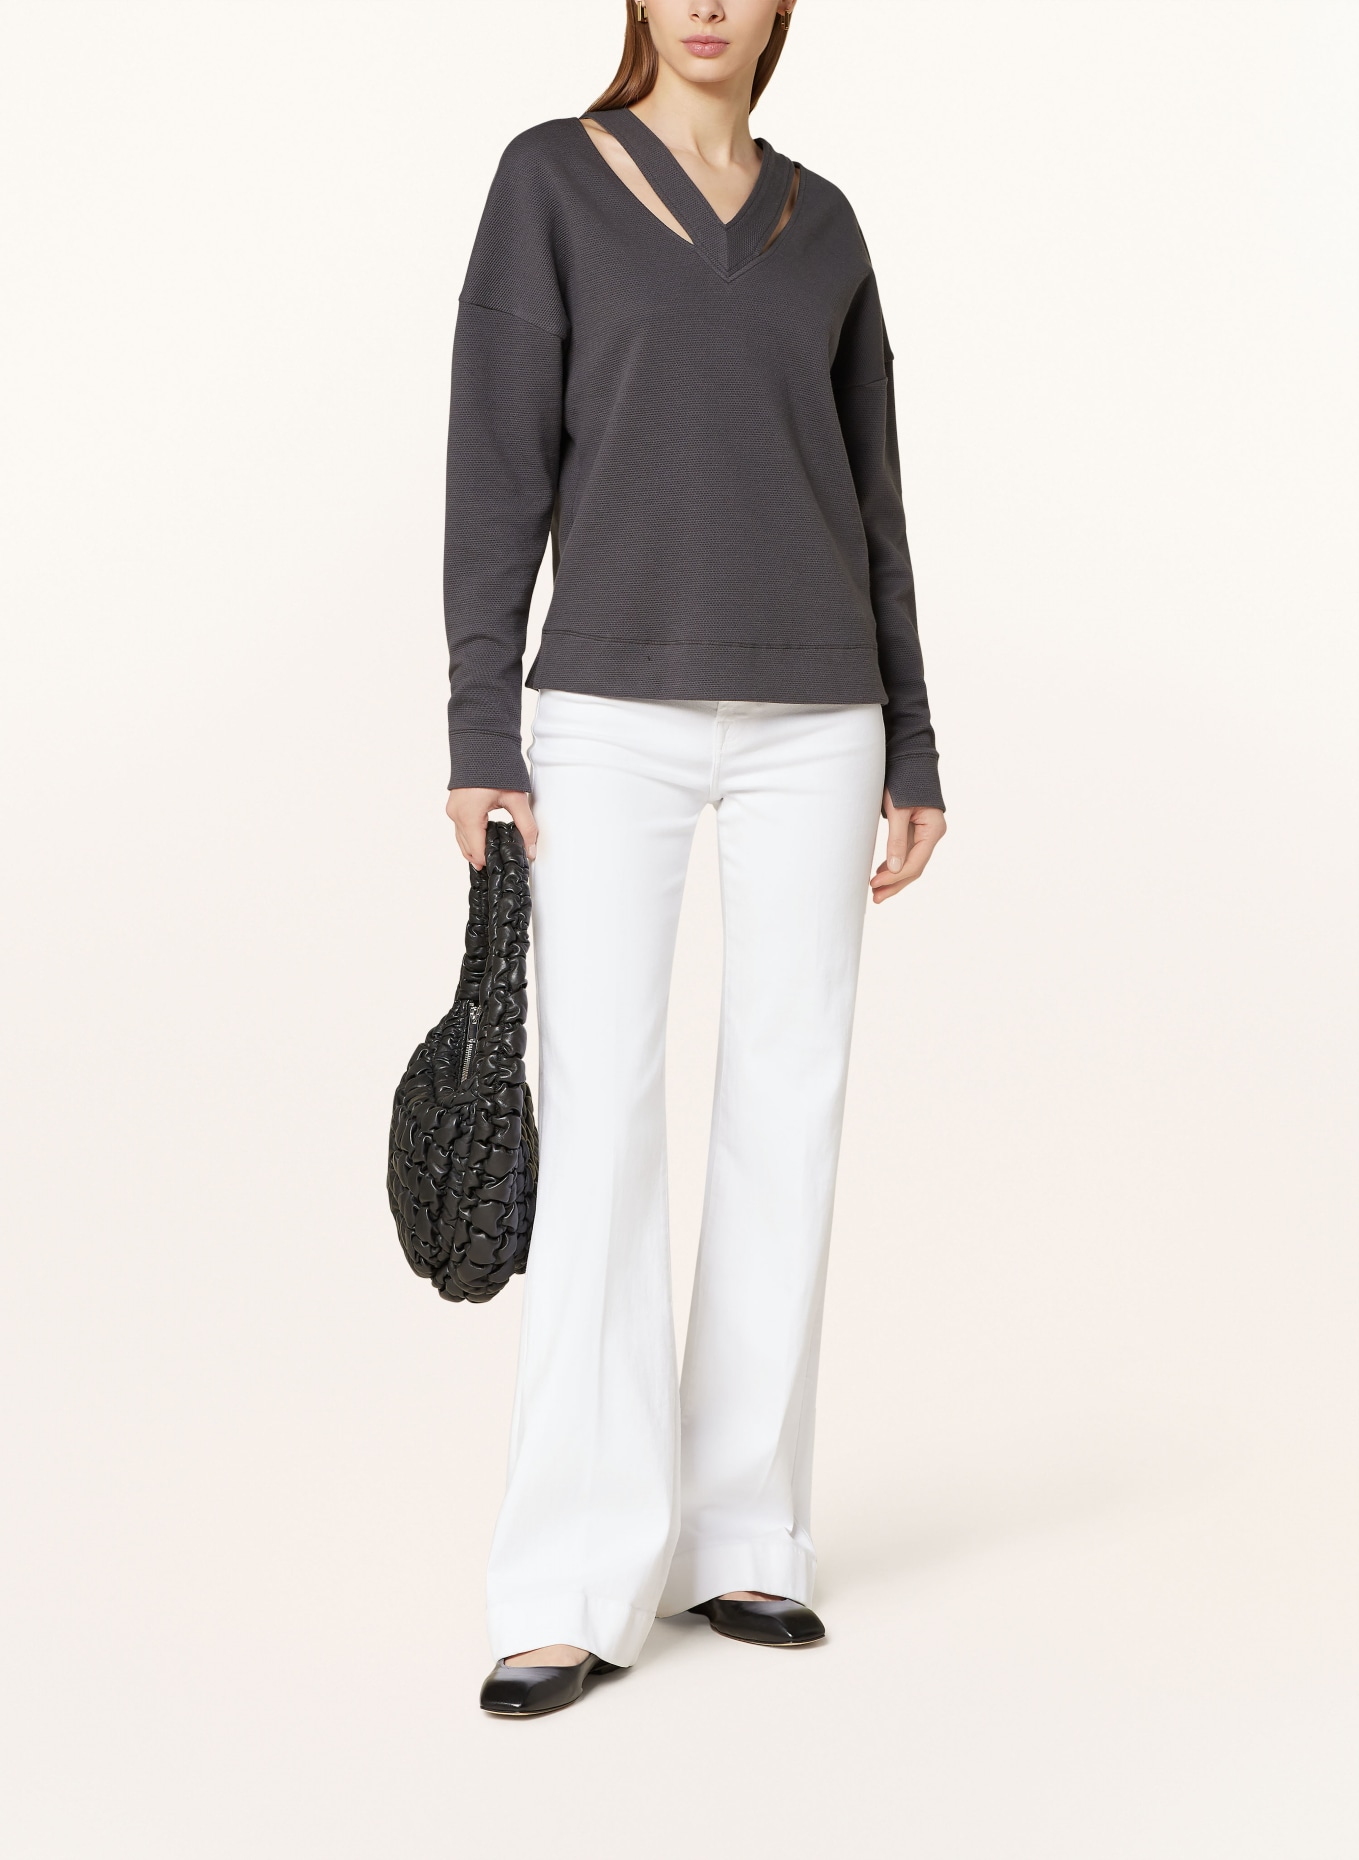 VANILIA Sweater with cut-out, Color: DARK GRAY (Image 2)